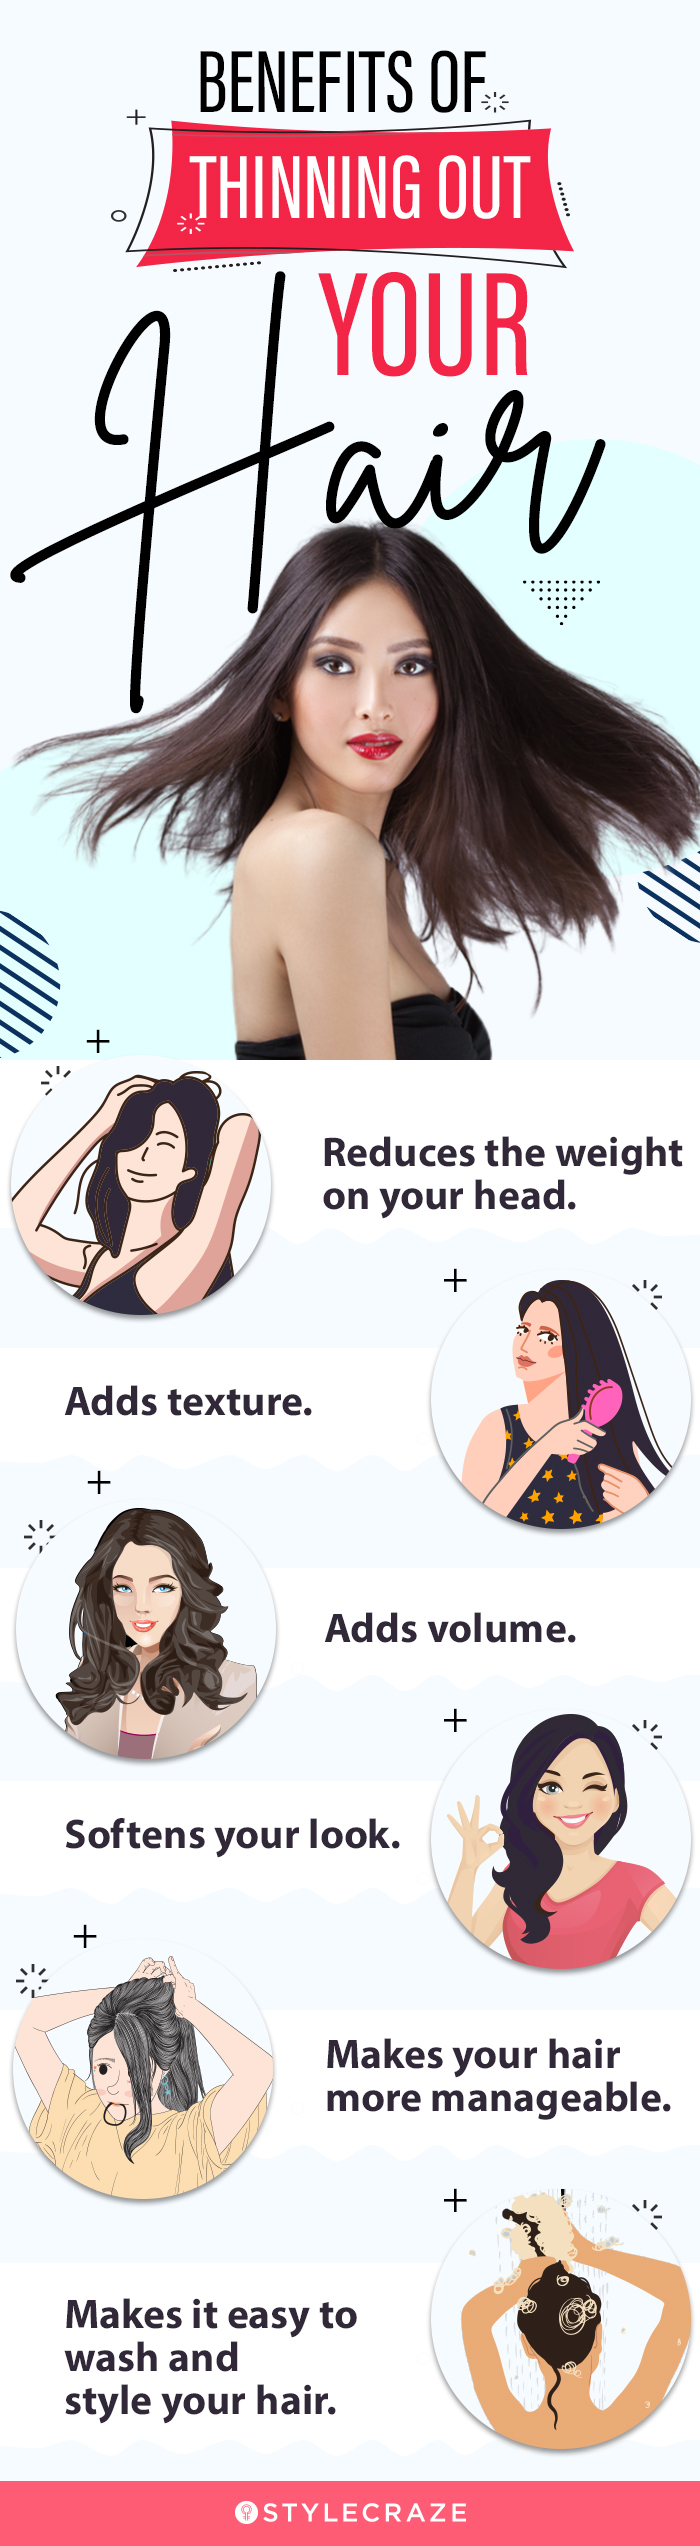 benefits of thinning out your hair (infographic)